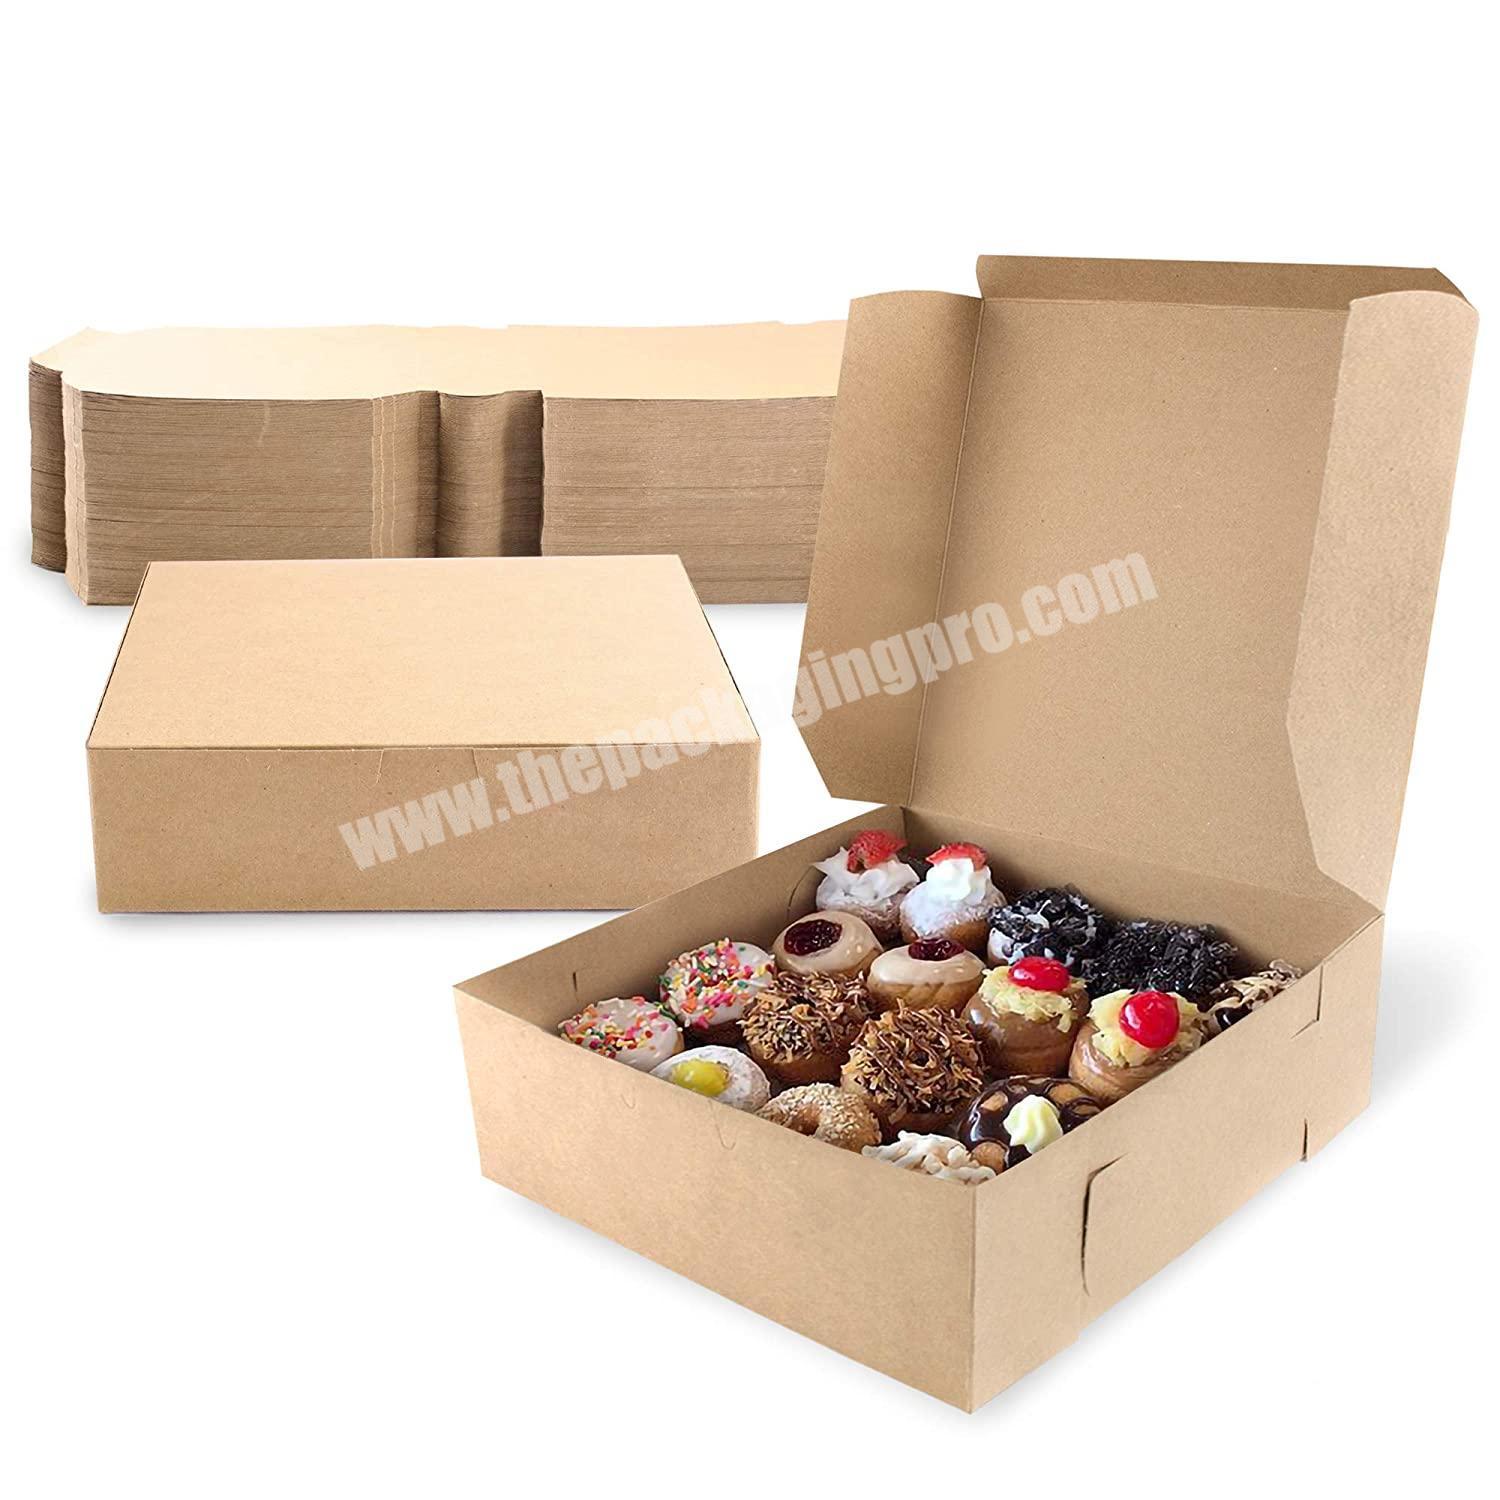 Boxes 9 x 9 x 3 Inches Small Brown Bakery Box for Cookies Compostable Kraft Paper Cardboard for Baked Goods Cake Packaging